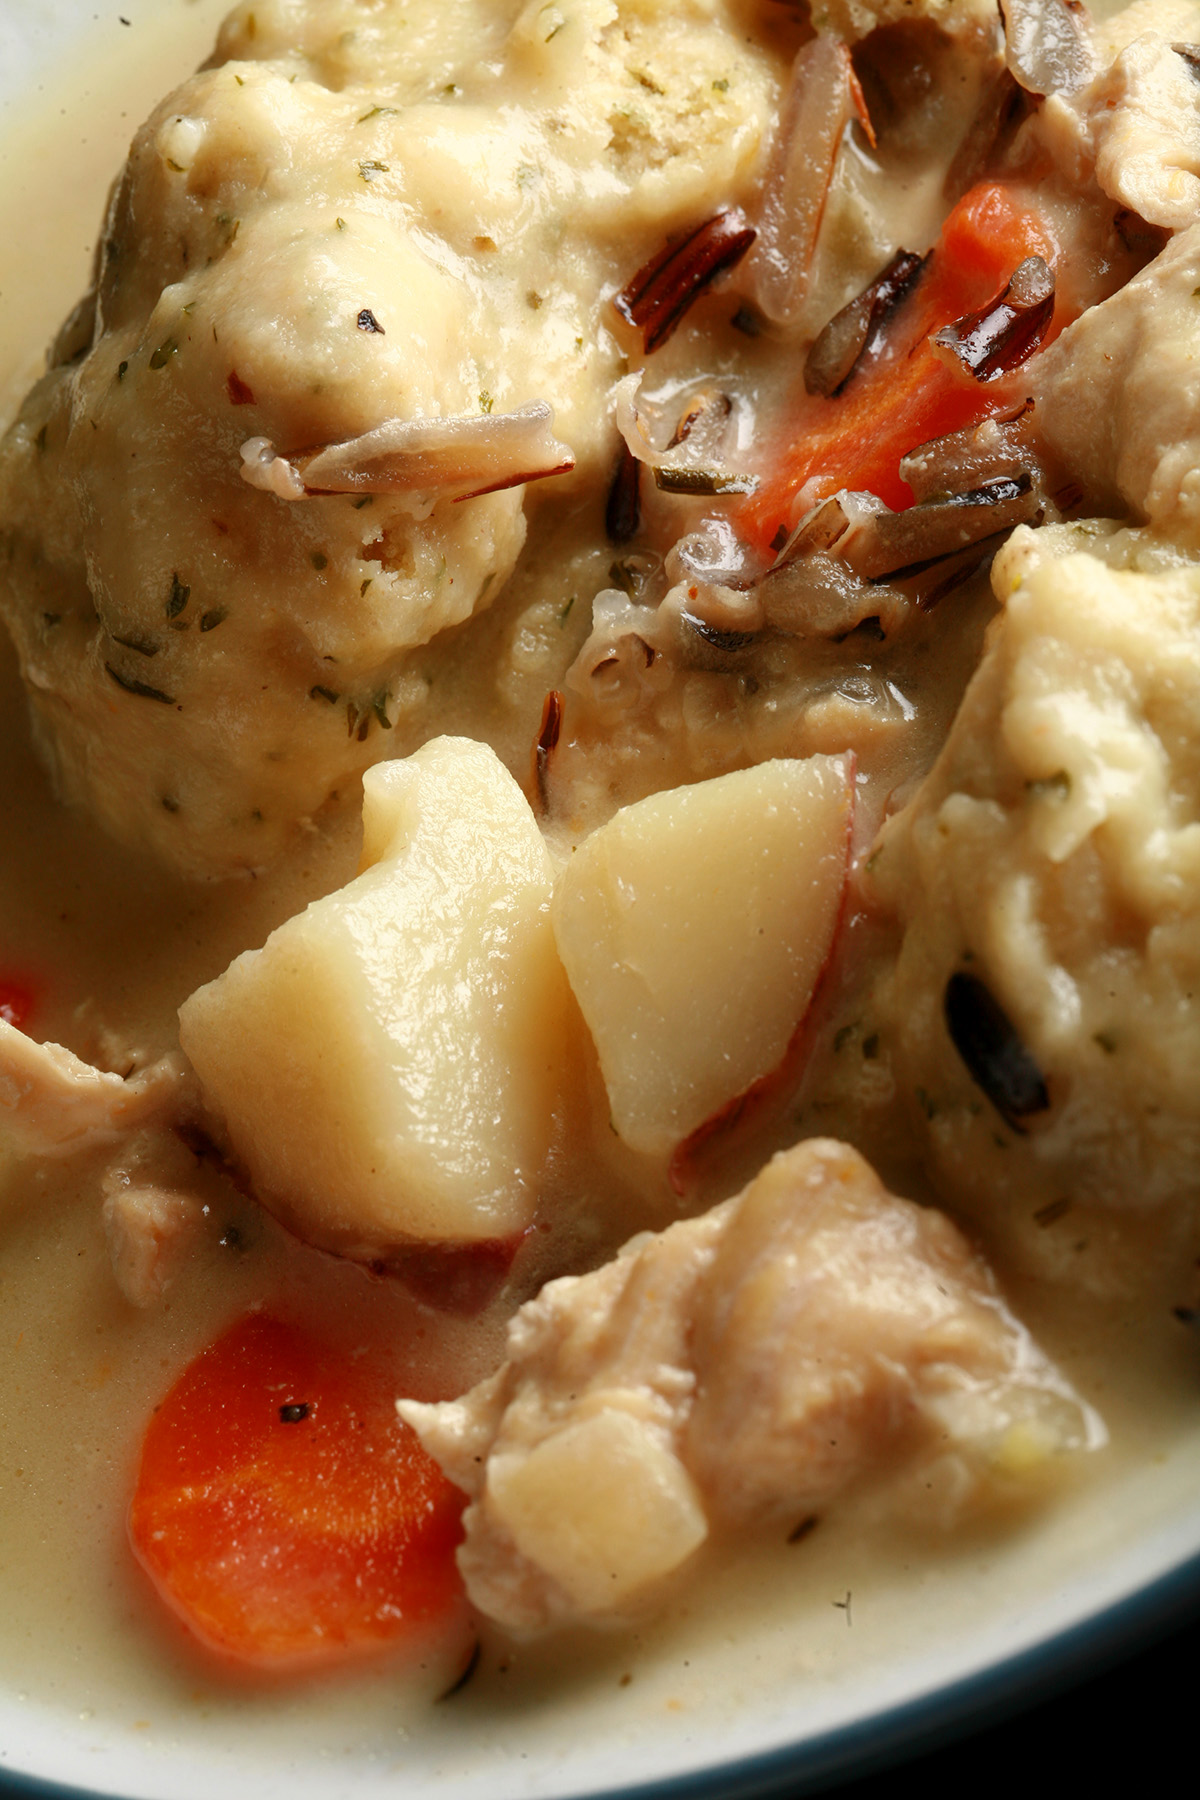 A bowl of gluten-free creamy chicken wild rice soup with dumplings.